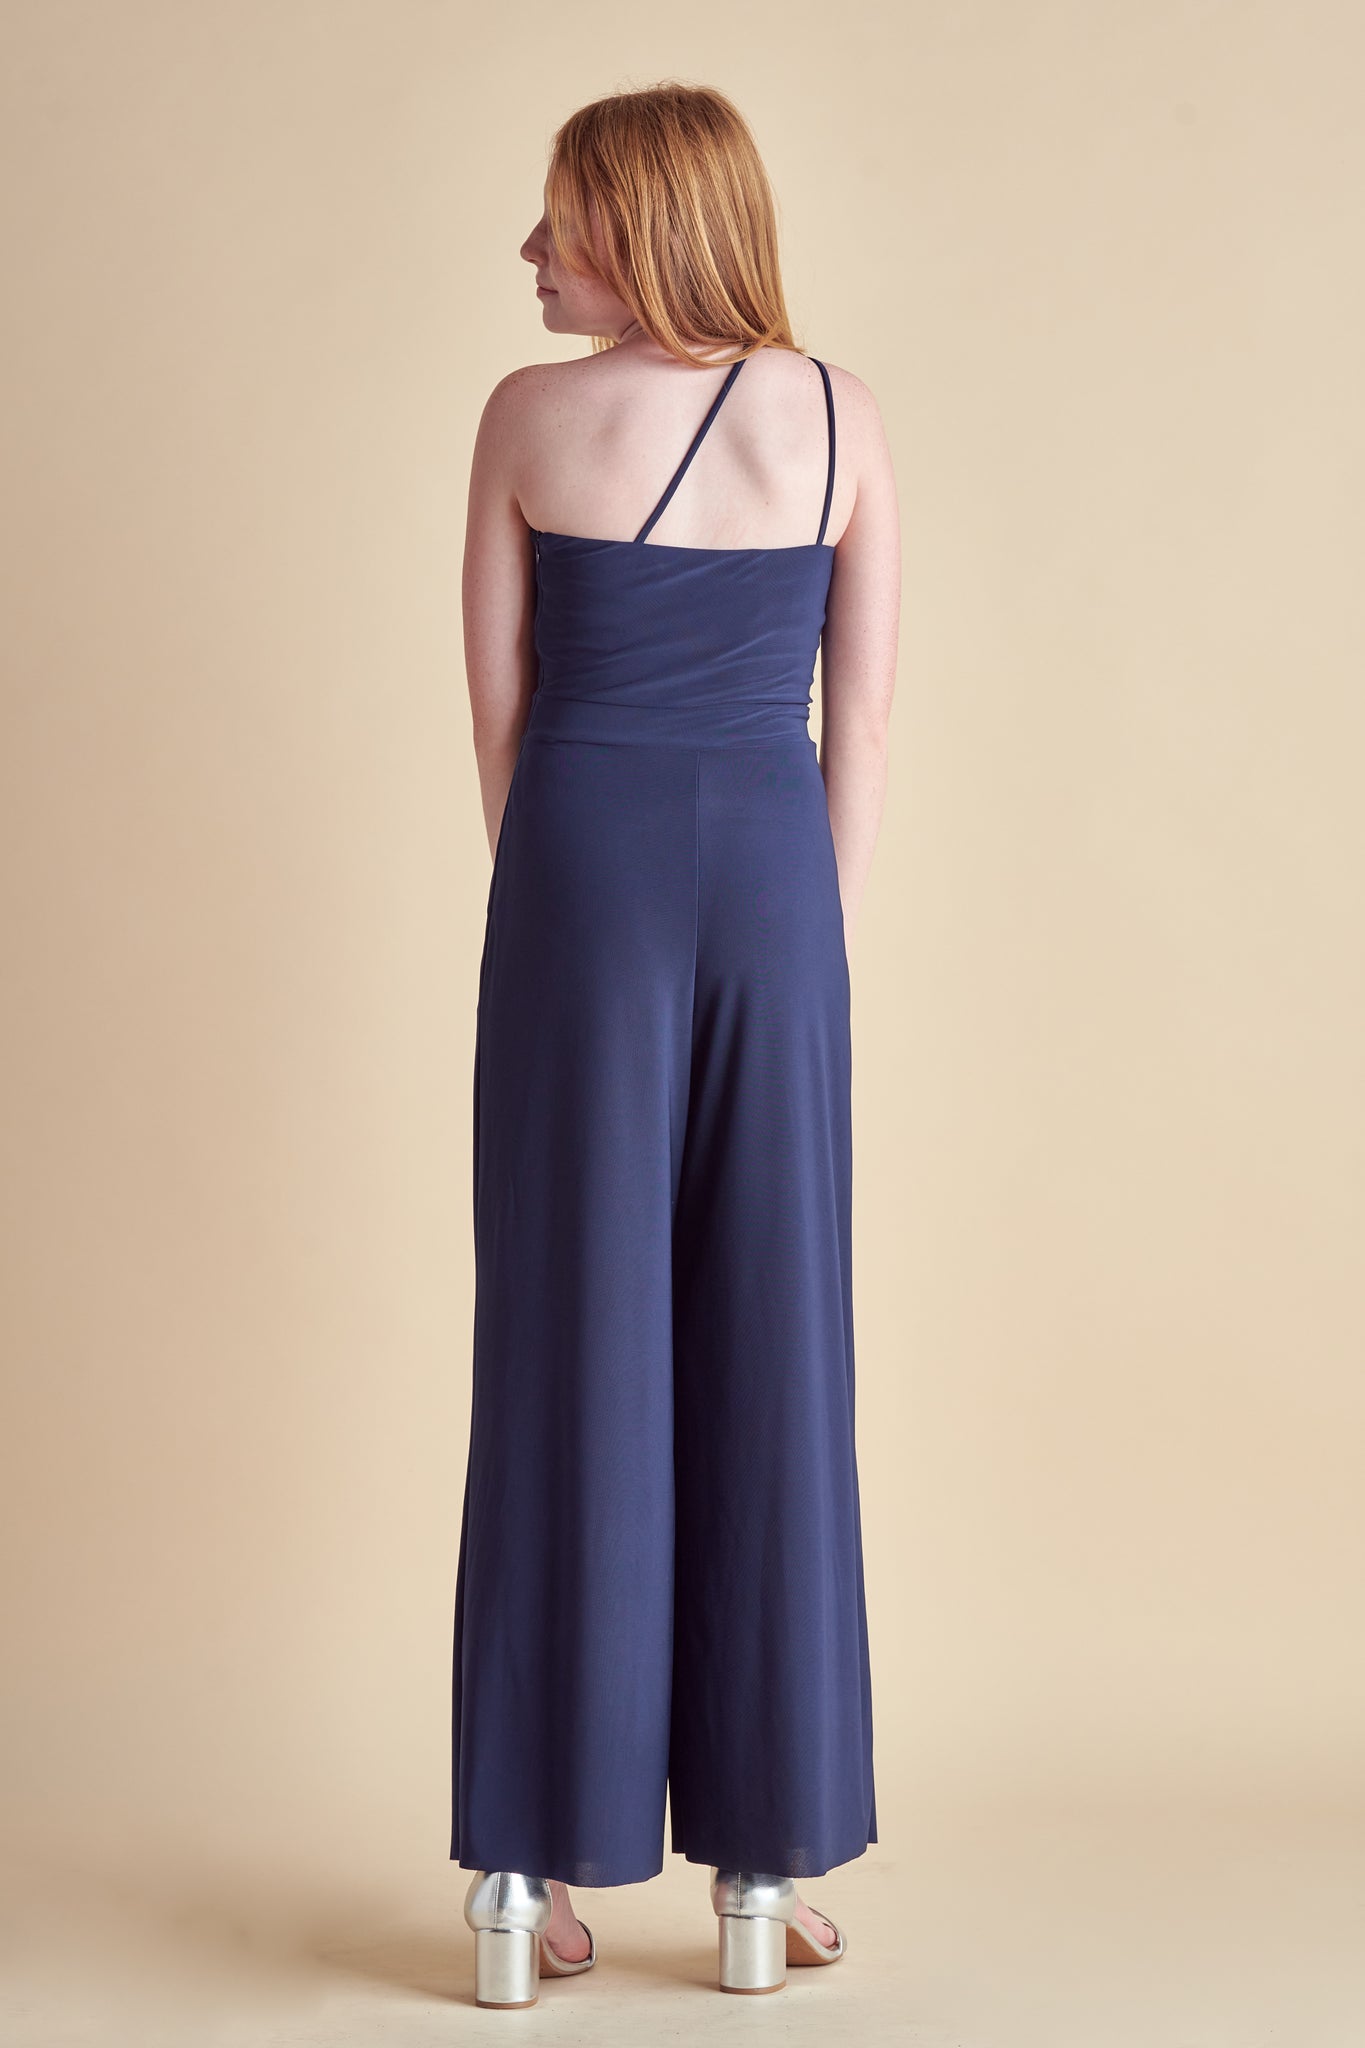 Blonde girl in a one shoulder, navy wide leg jumpsuit with silver heel.